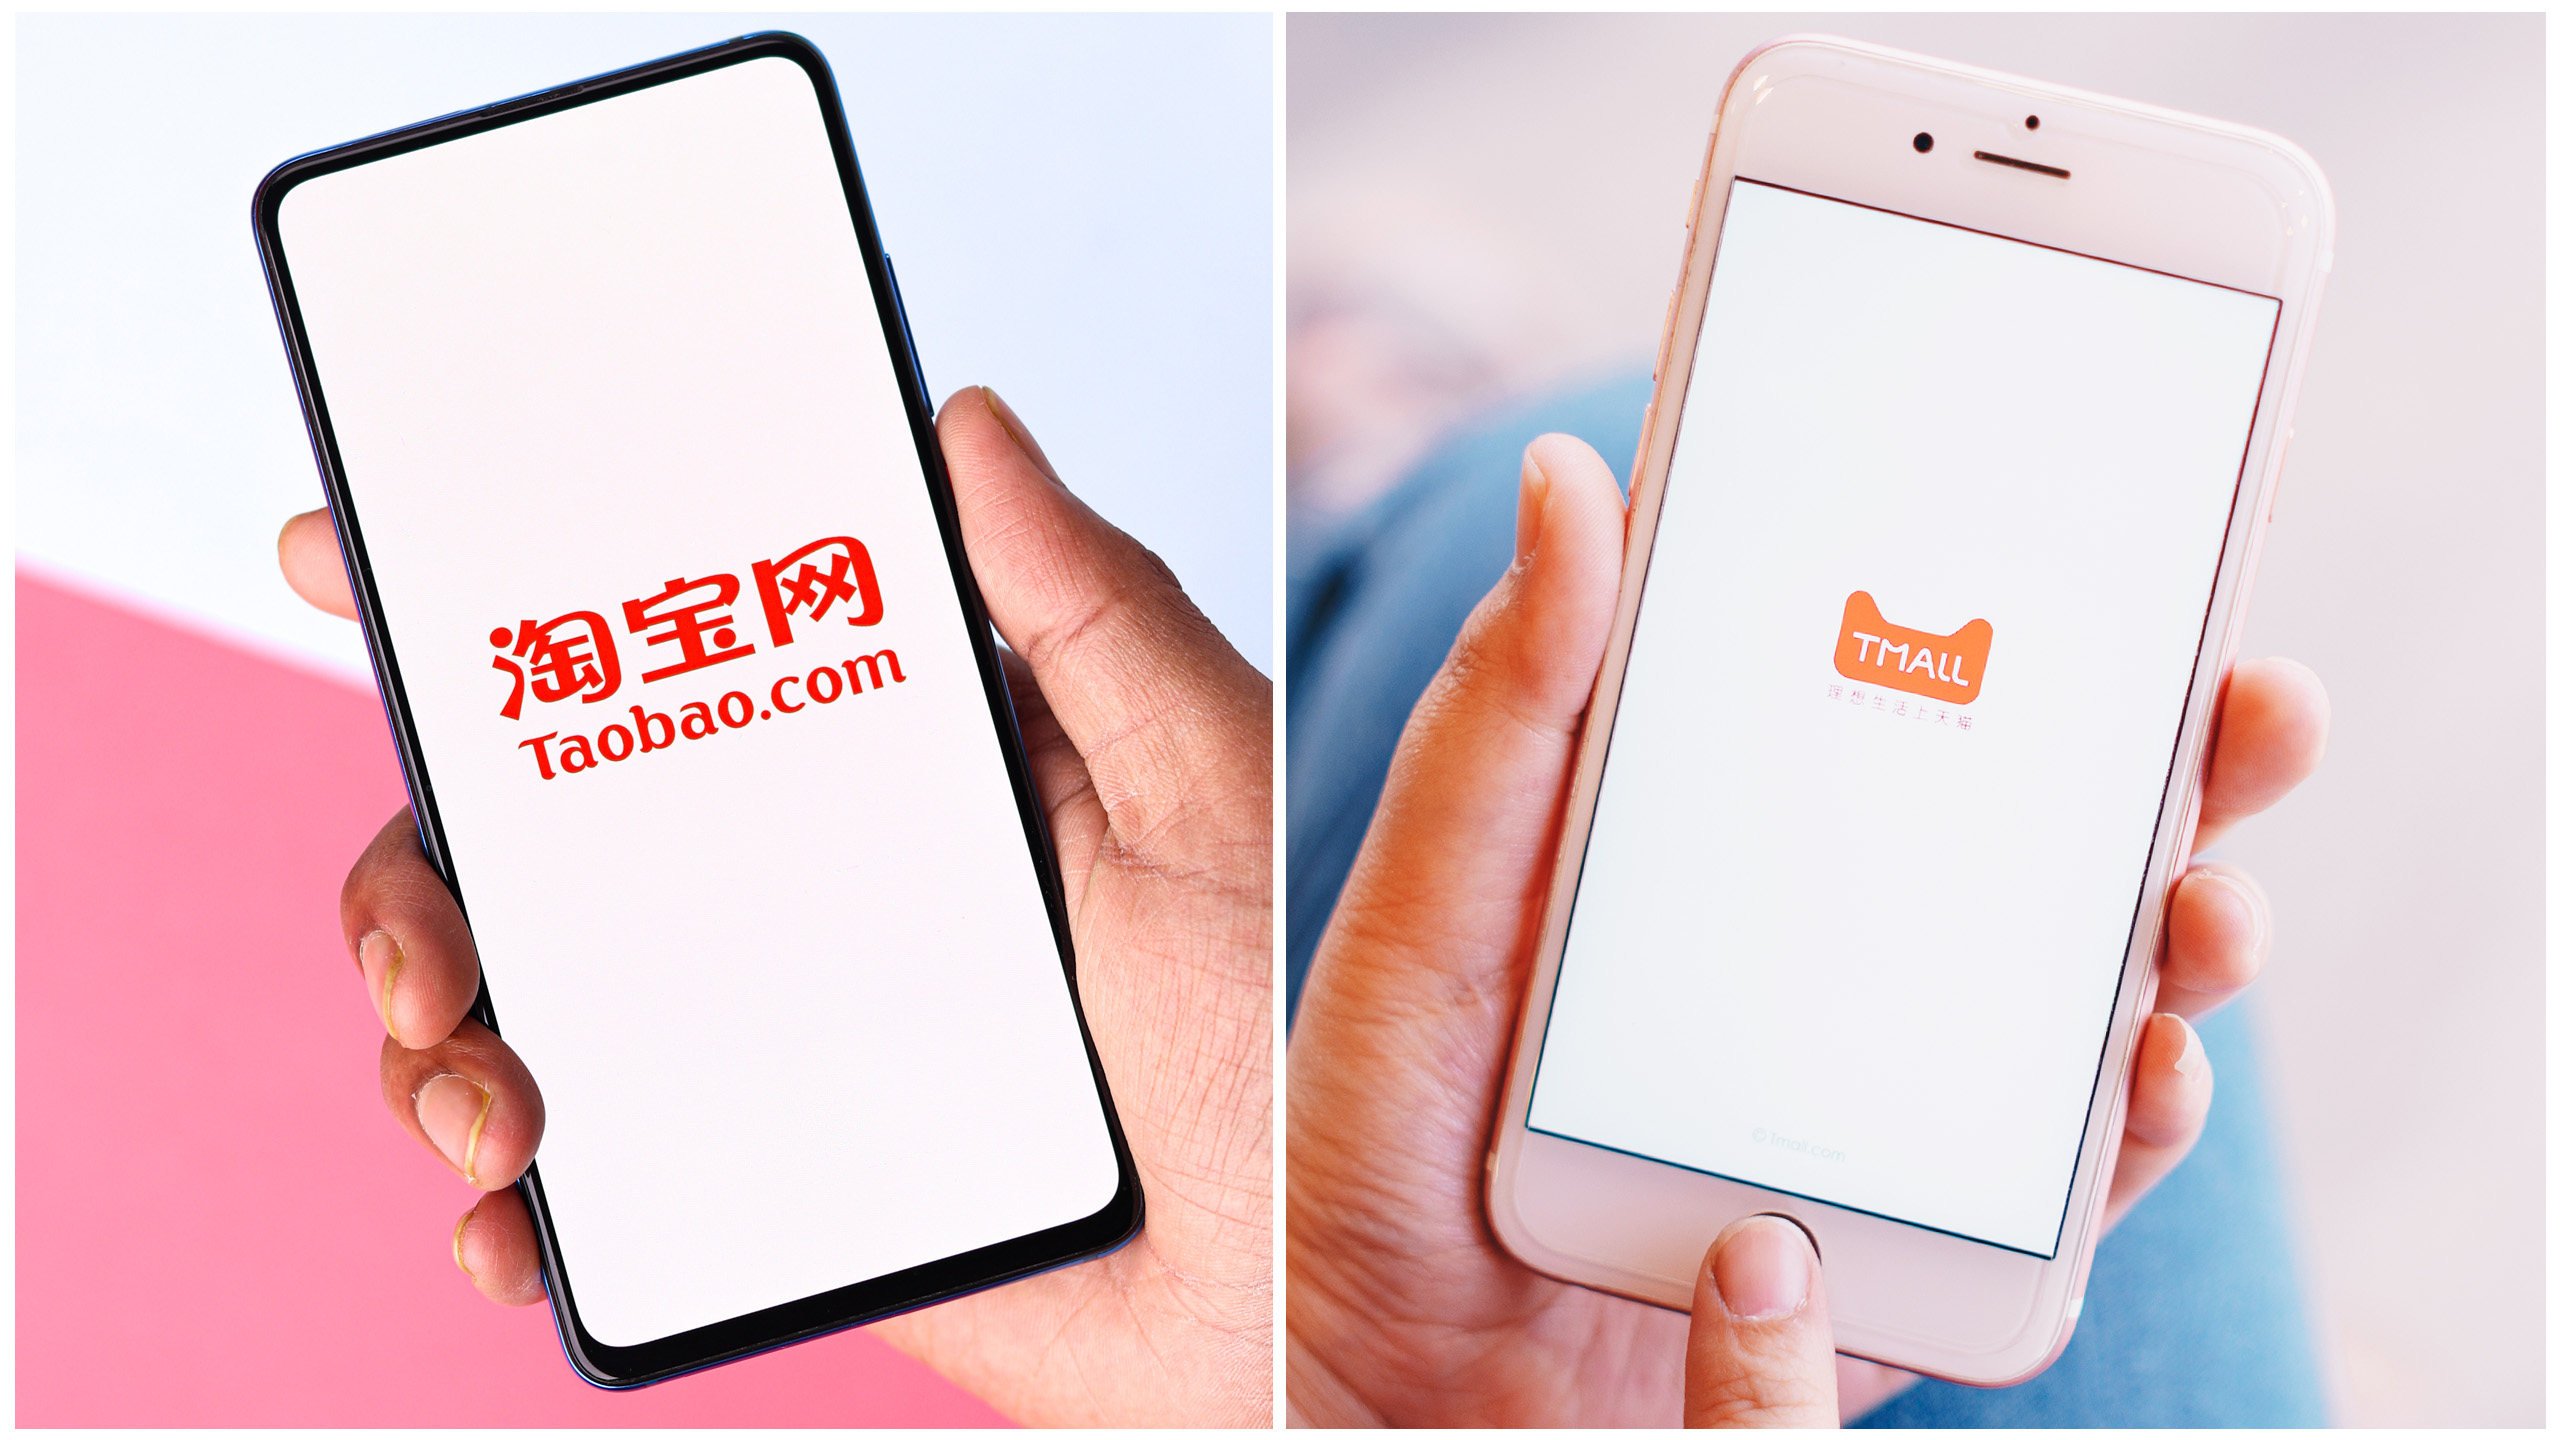 The latest initiatives by Taobao and Tmall Group reflect efforts to boost support for merchants amid increased competition on the mainland. Photo: Shutterstock